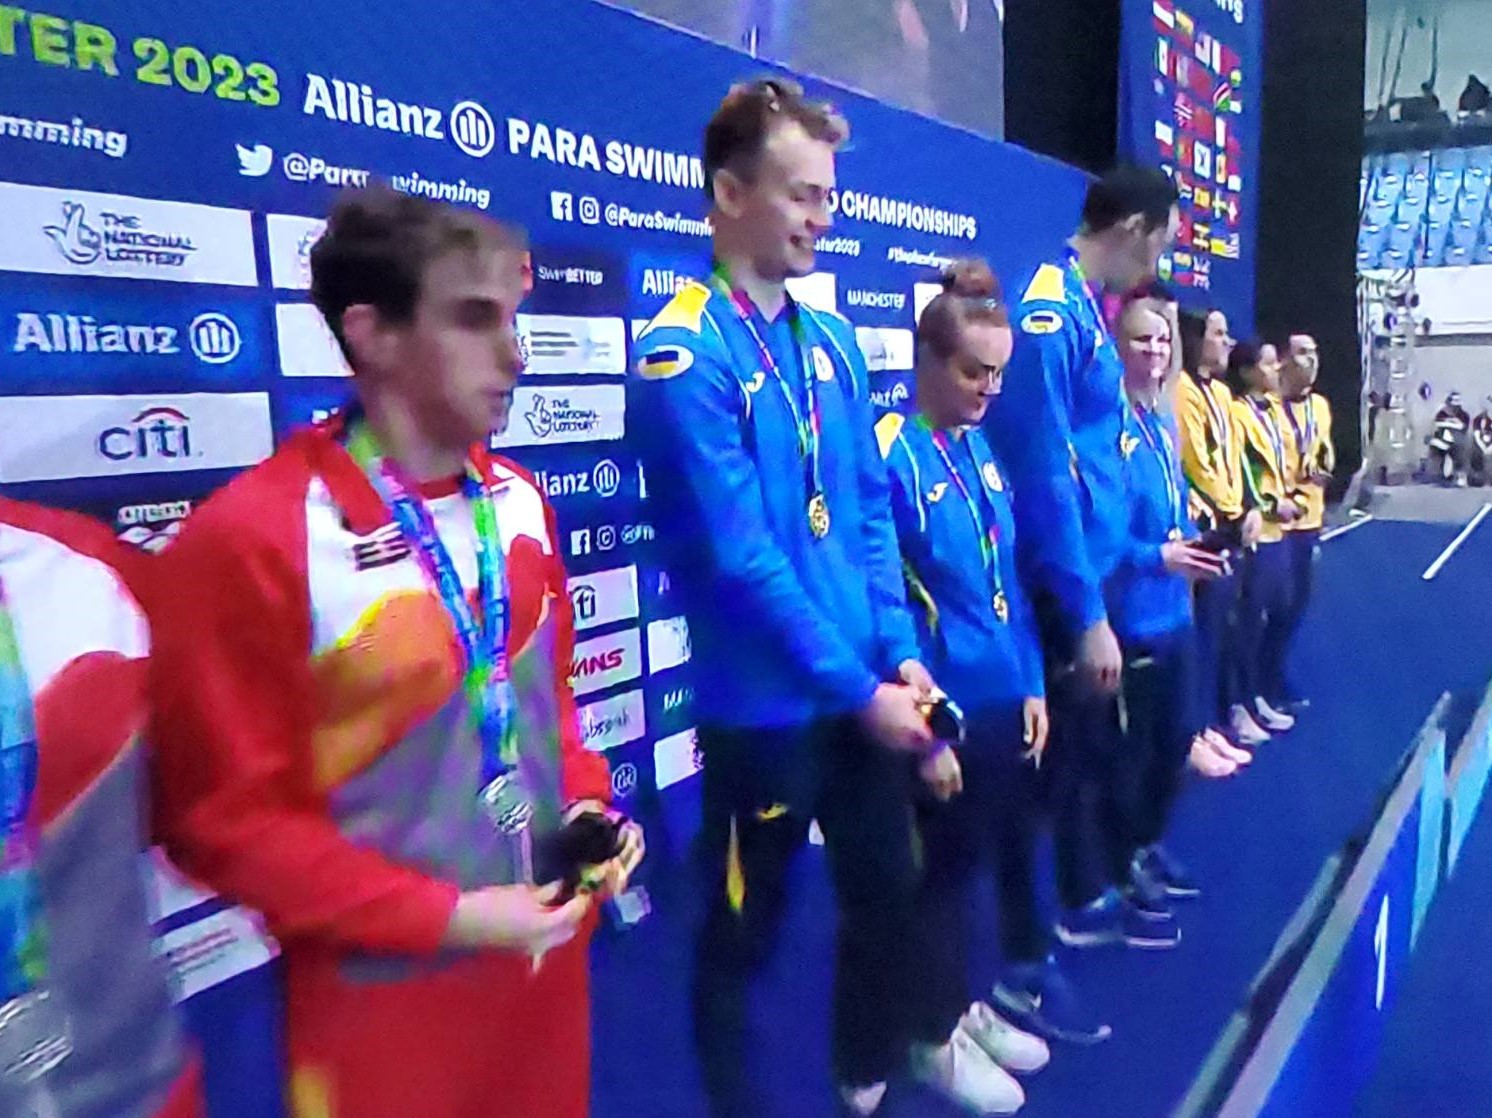 Athlete Oleksii Virchenko wins the gold award of the World Para Swimming Championship, becoming the best in the mixed relay